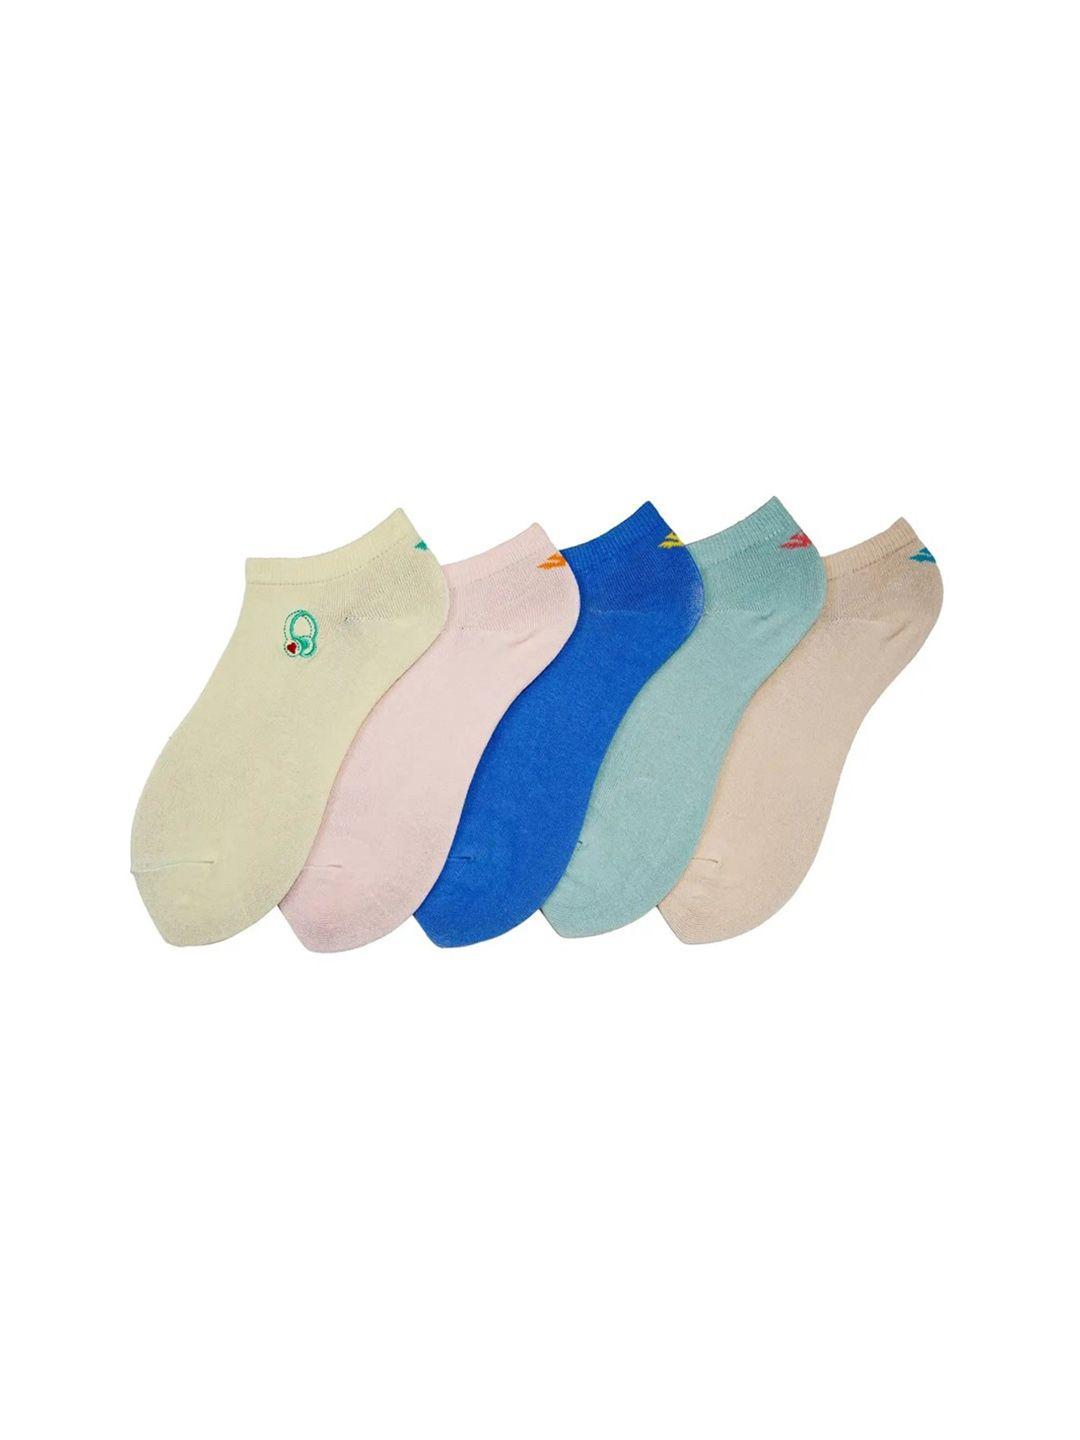 cotstyle pack of 5 ankle-length socks